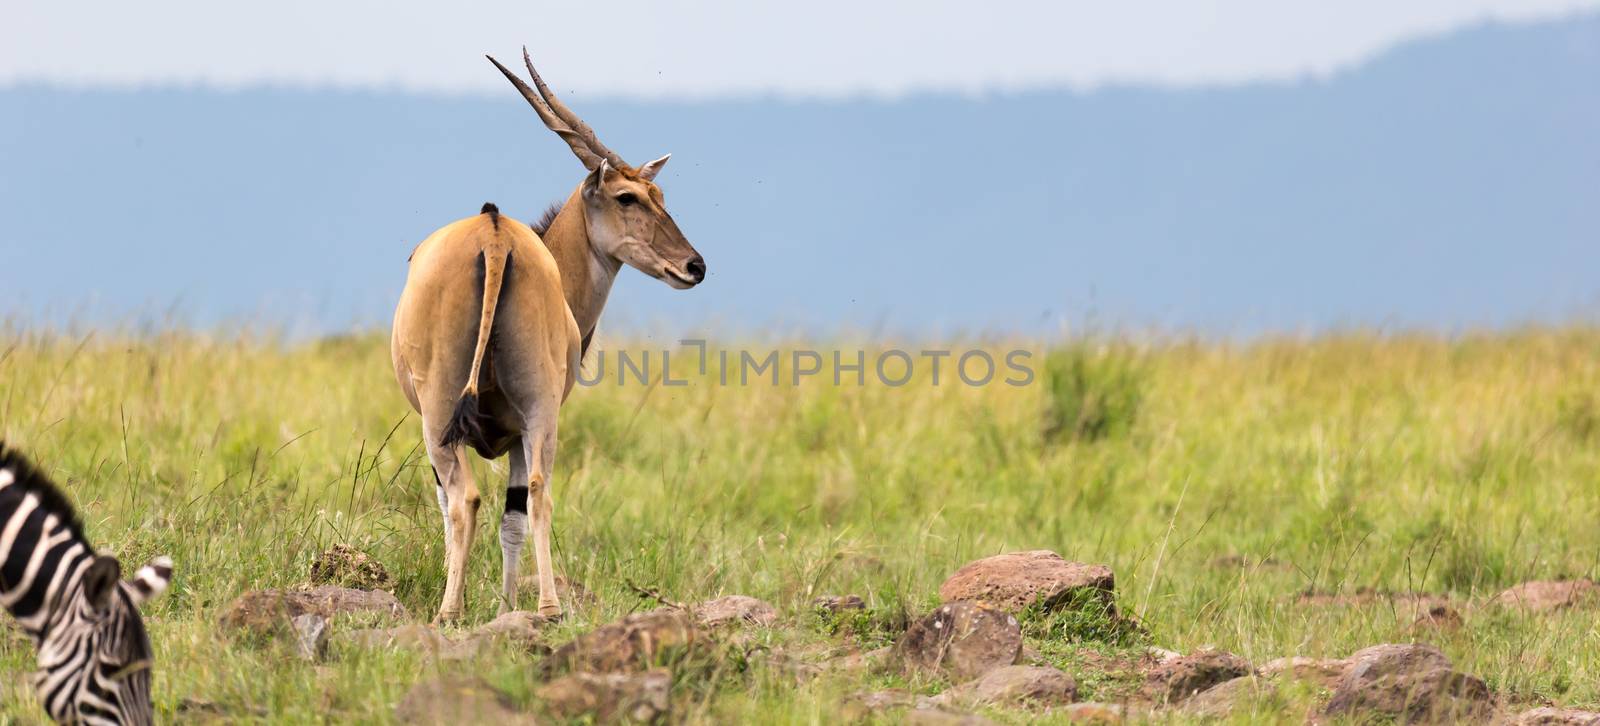 Elend antilope in the Kenyan savanna between the different plant by 25ehaag6